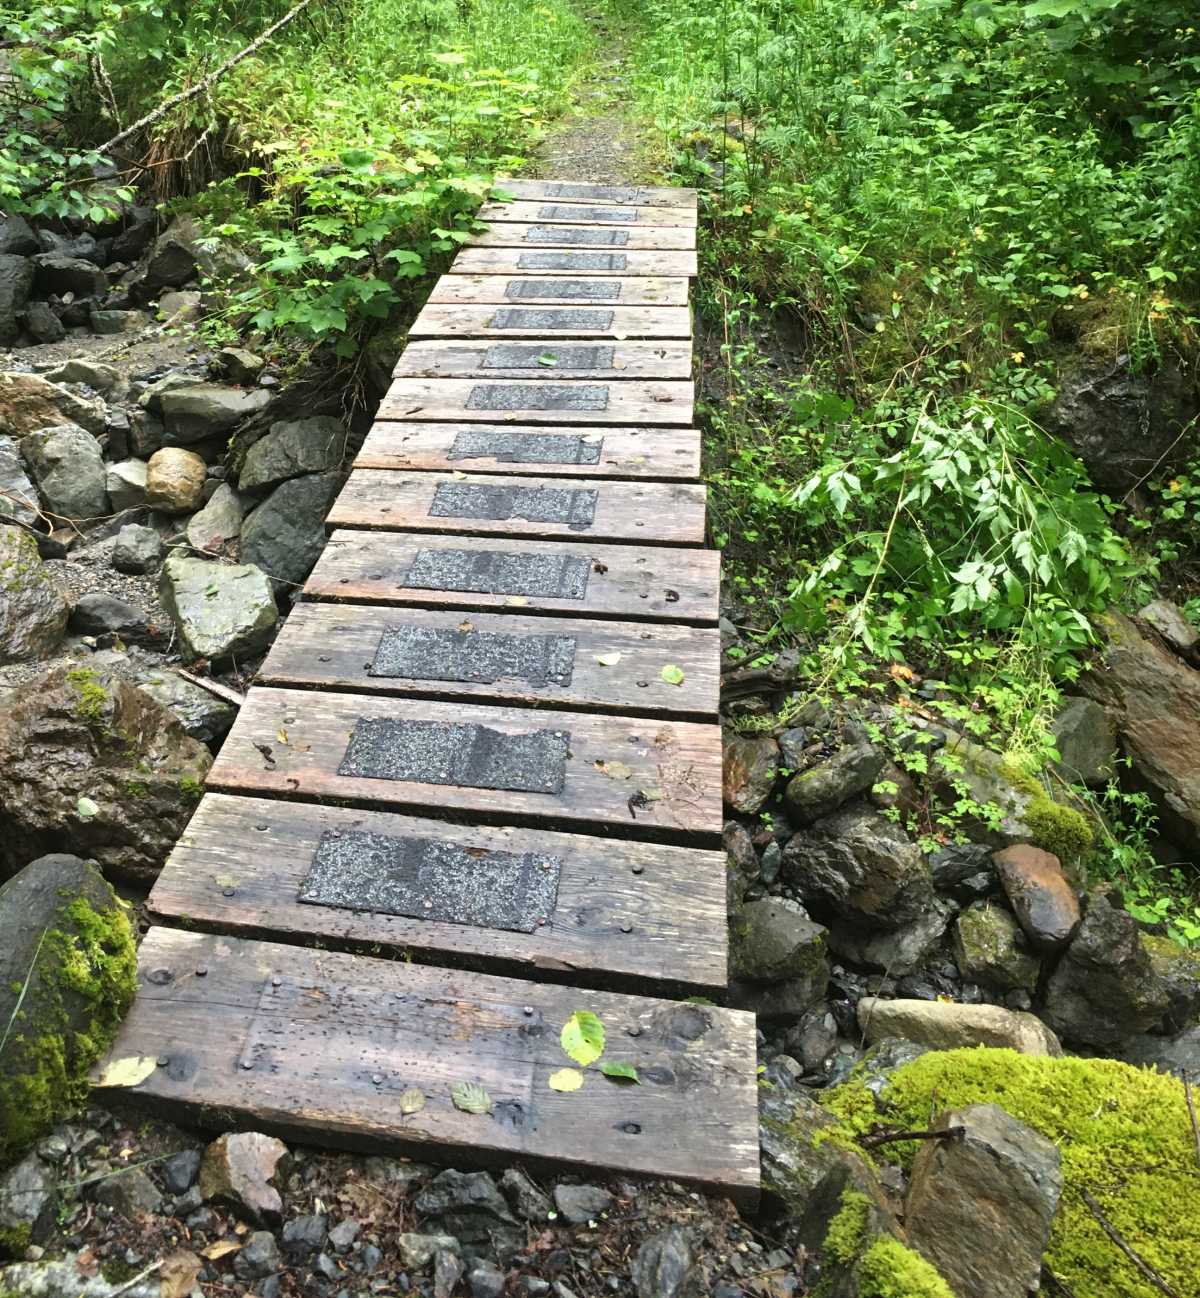 This route was restored as a hiking trail in 2016